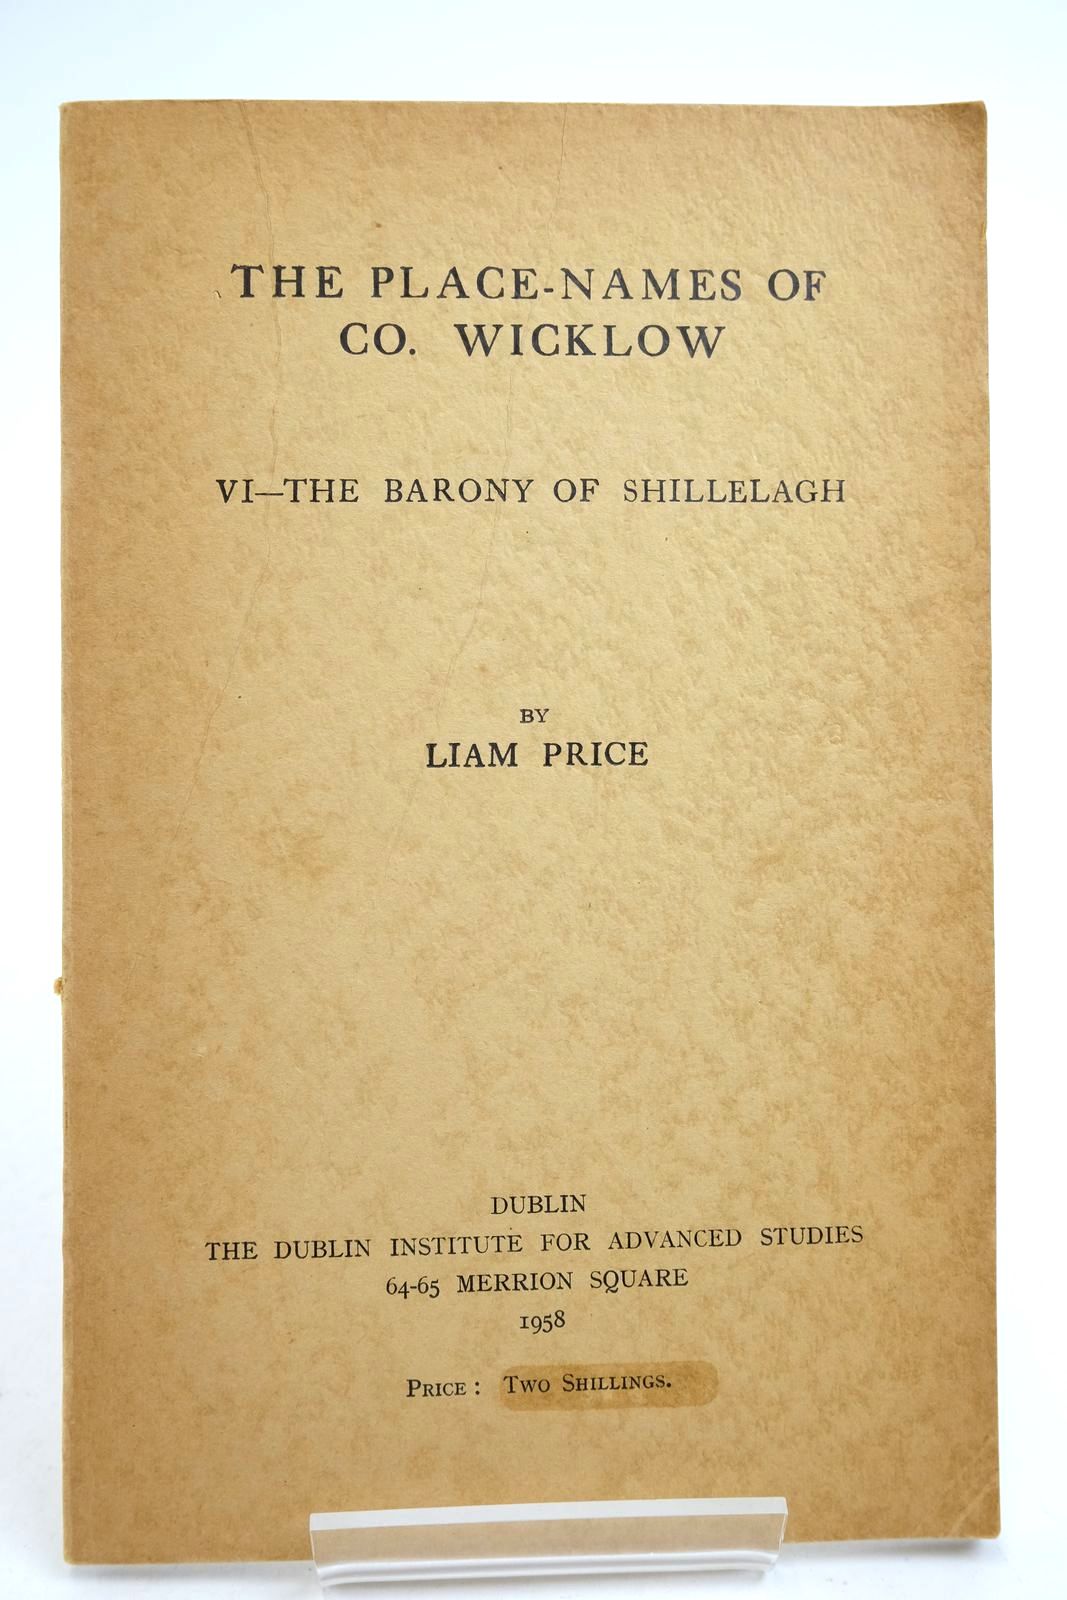 Photo of THE PLACE-NAMES OF CO. WICKLOW: VI - THE BARONY OF SHILLELAGH- Stock Number: 2140630